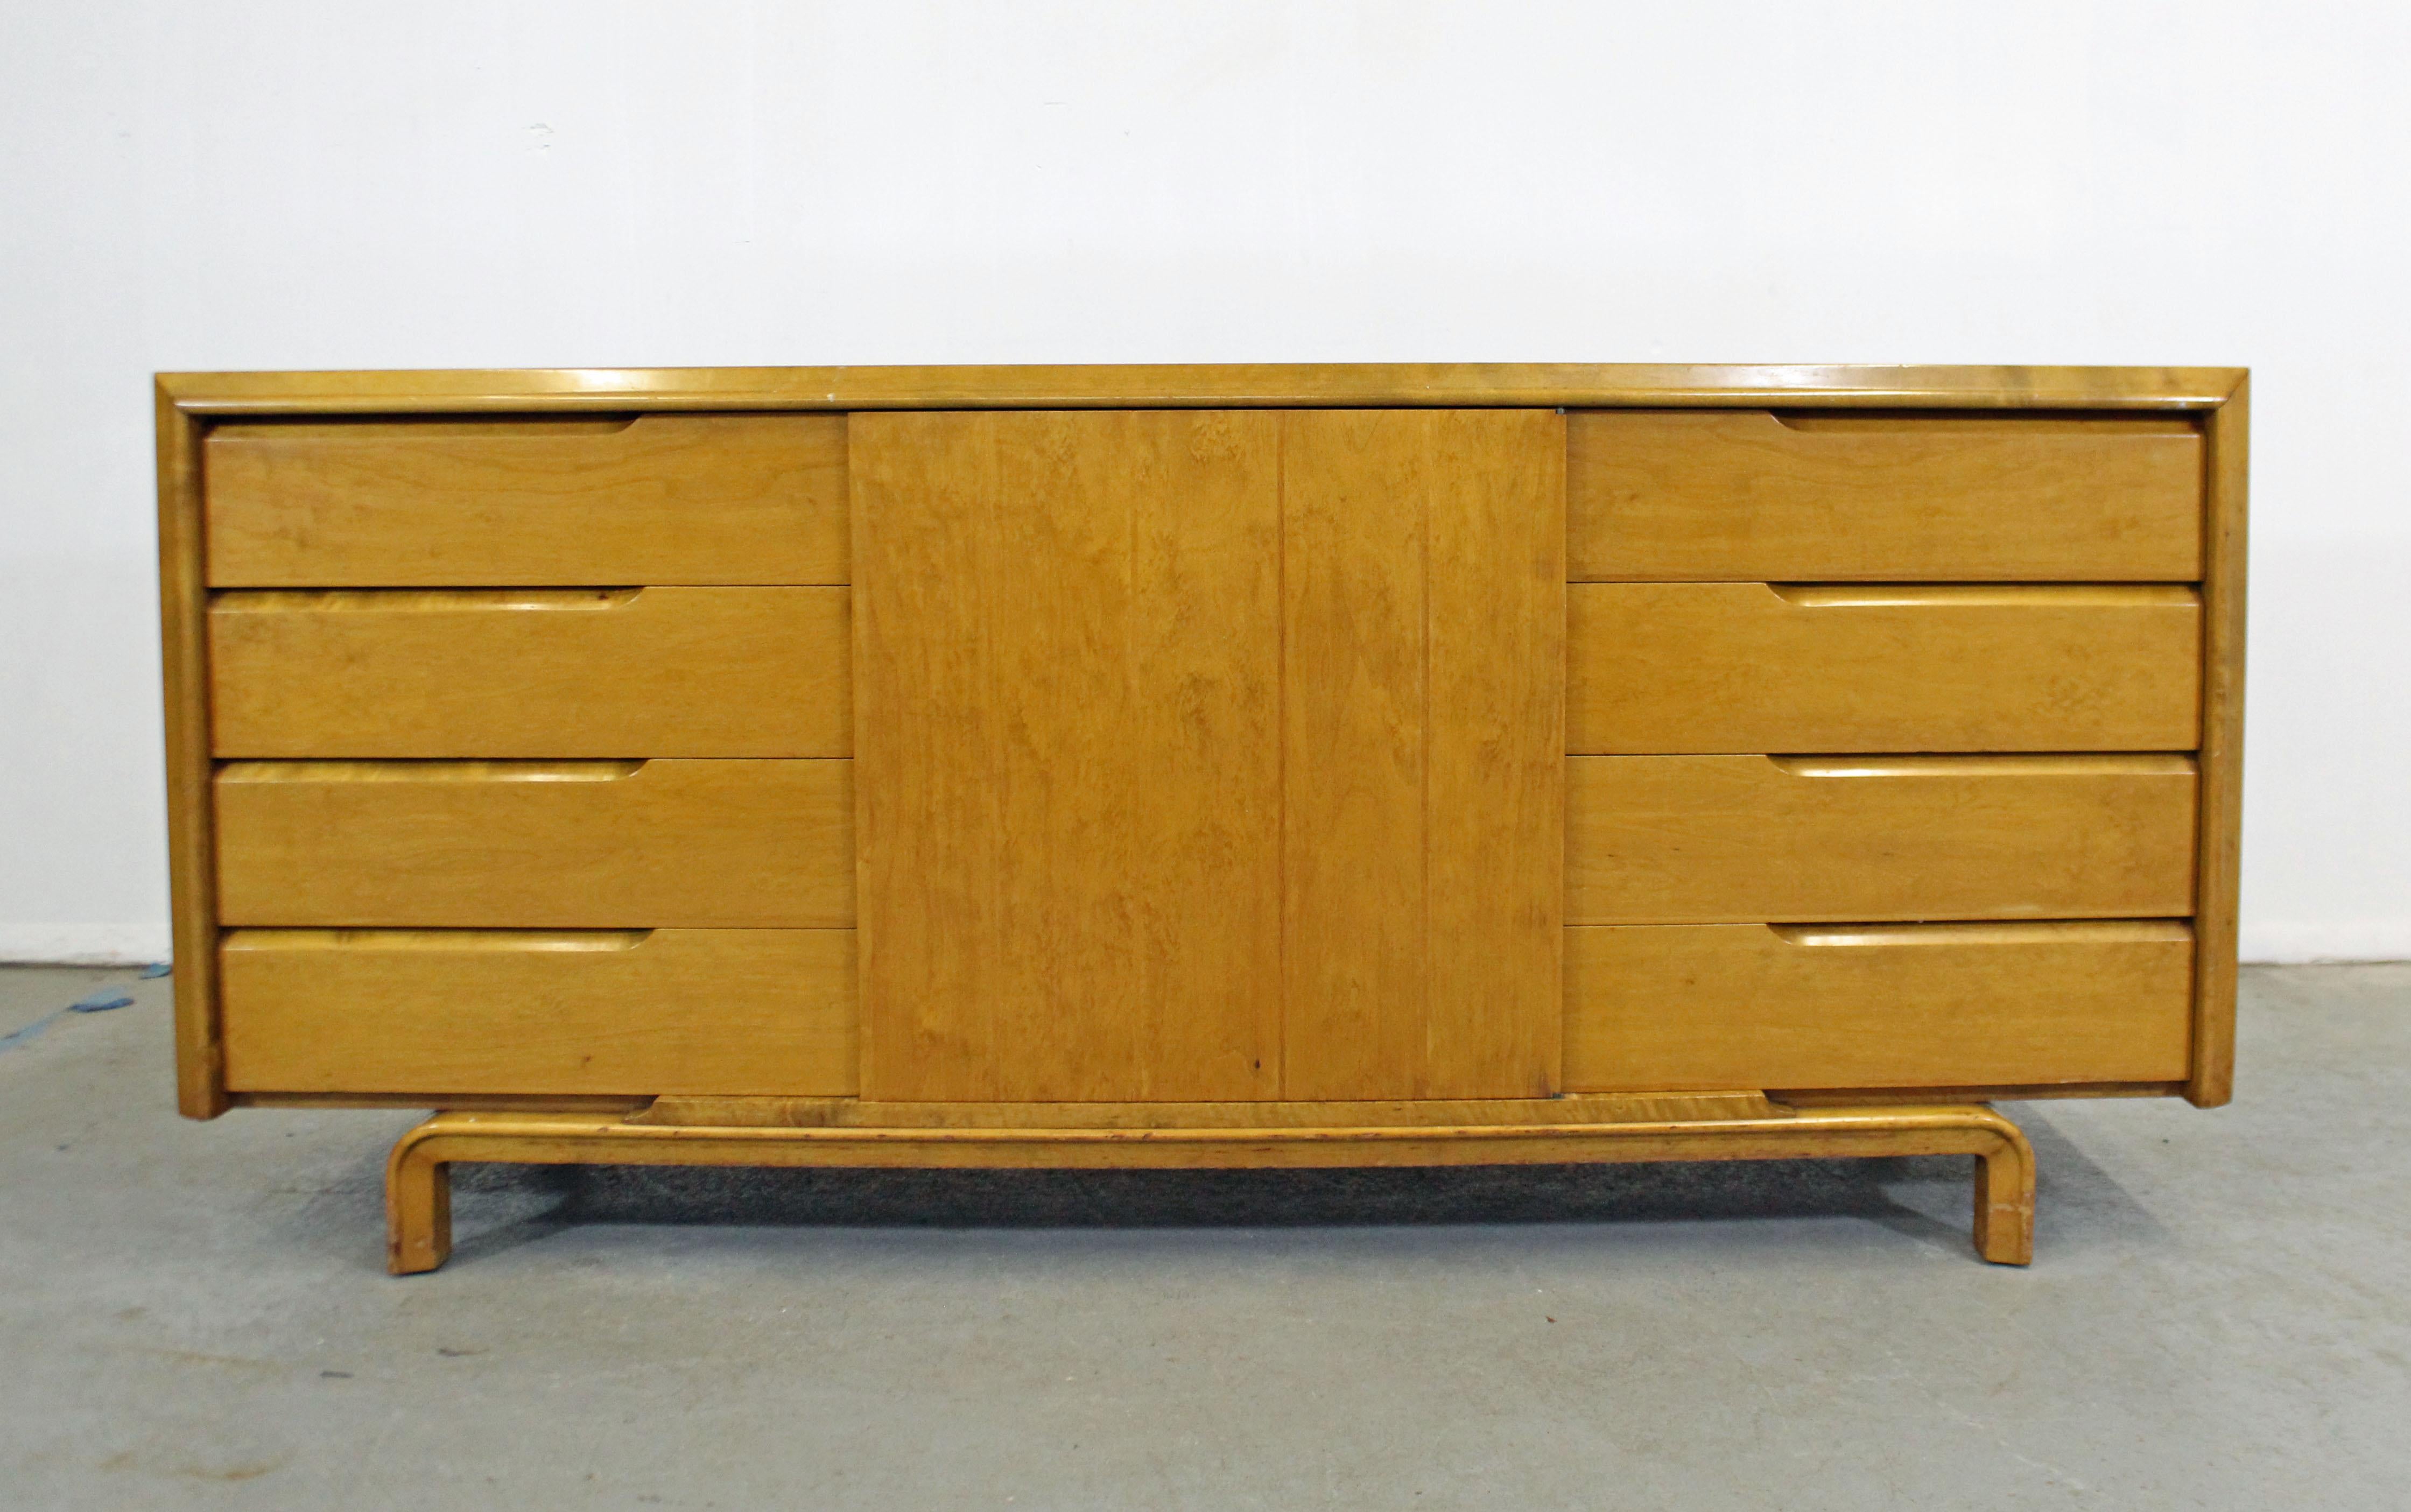 Offered is a beautiful vintage midcentury credenza designed by American designer Edmond J. Spence. Has ample storage space with four dovetailed drawers on each side and a middle door with one drawer and space for storage inside. One top drawer has